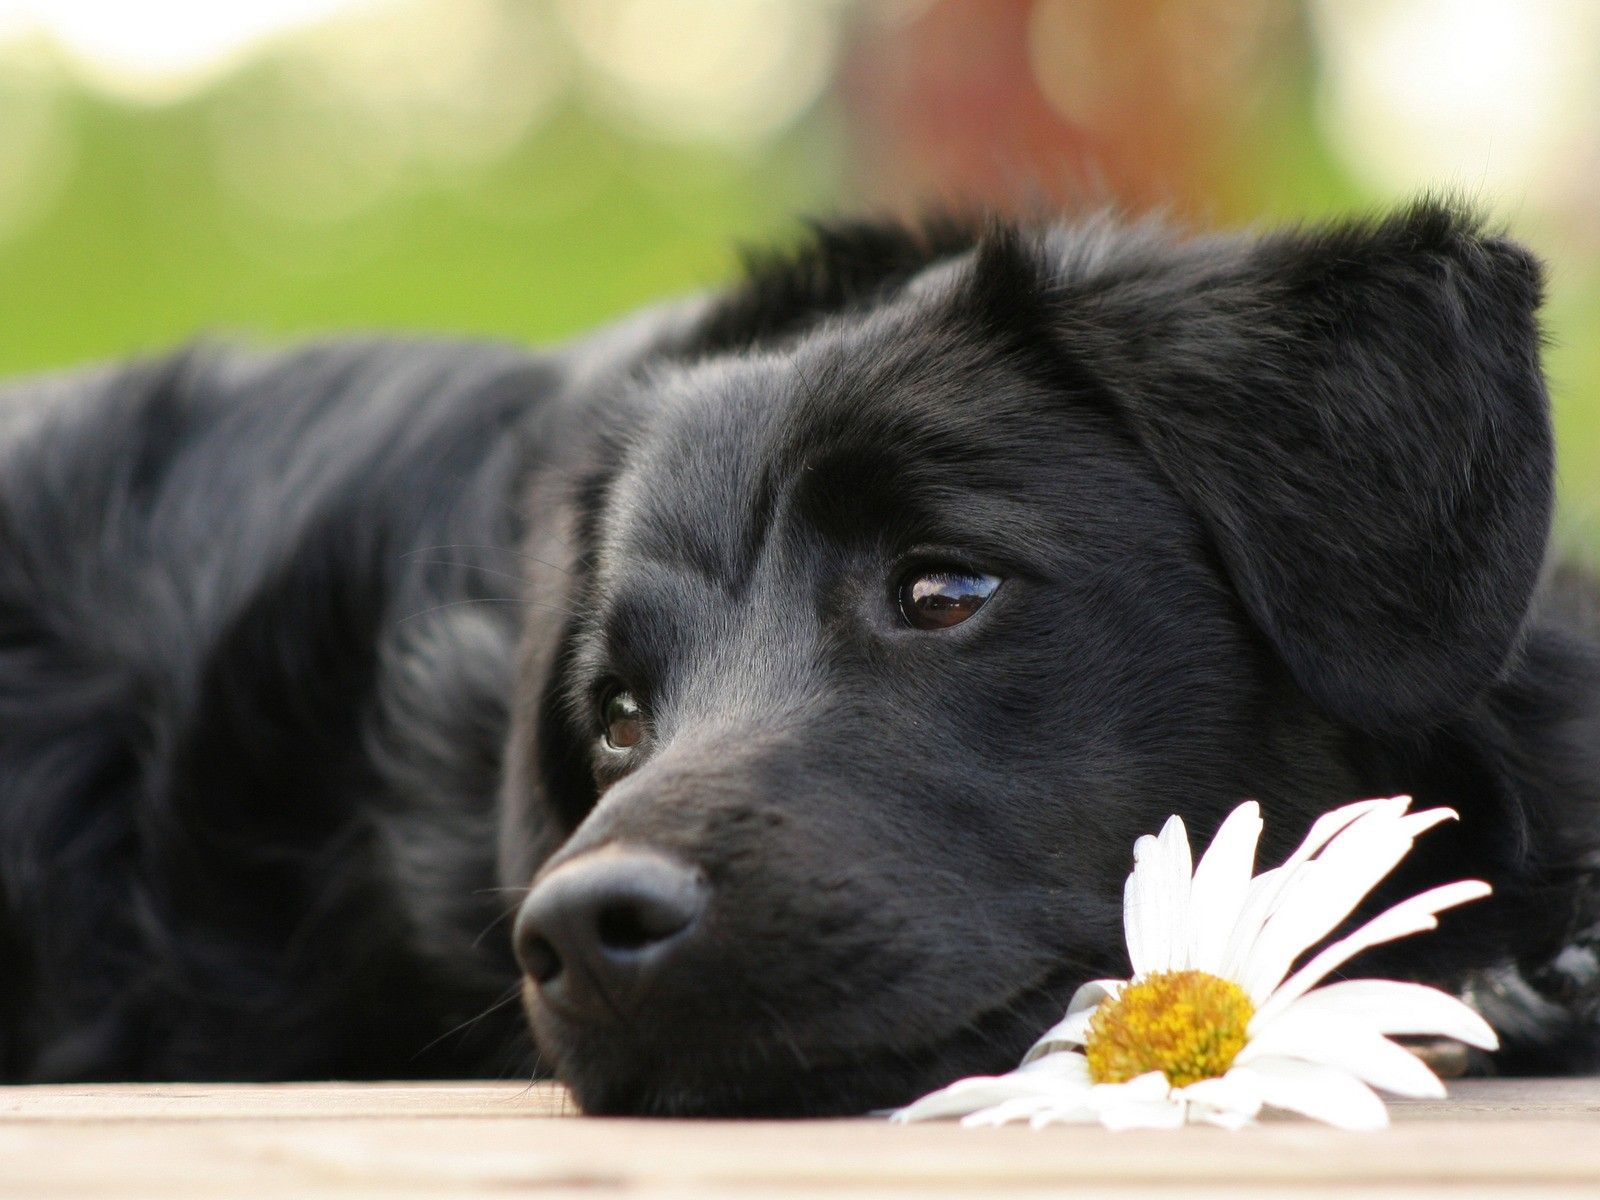 The dog and the flower